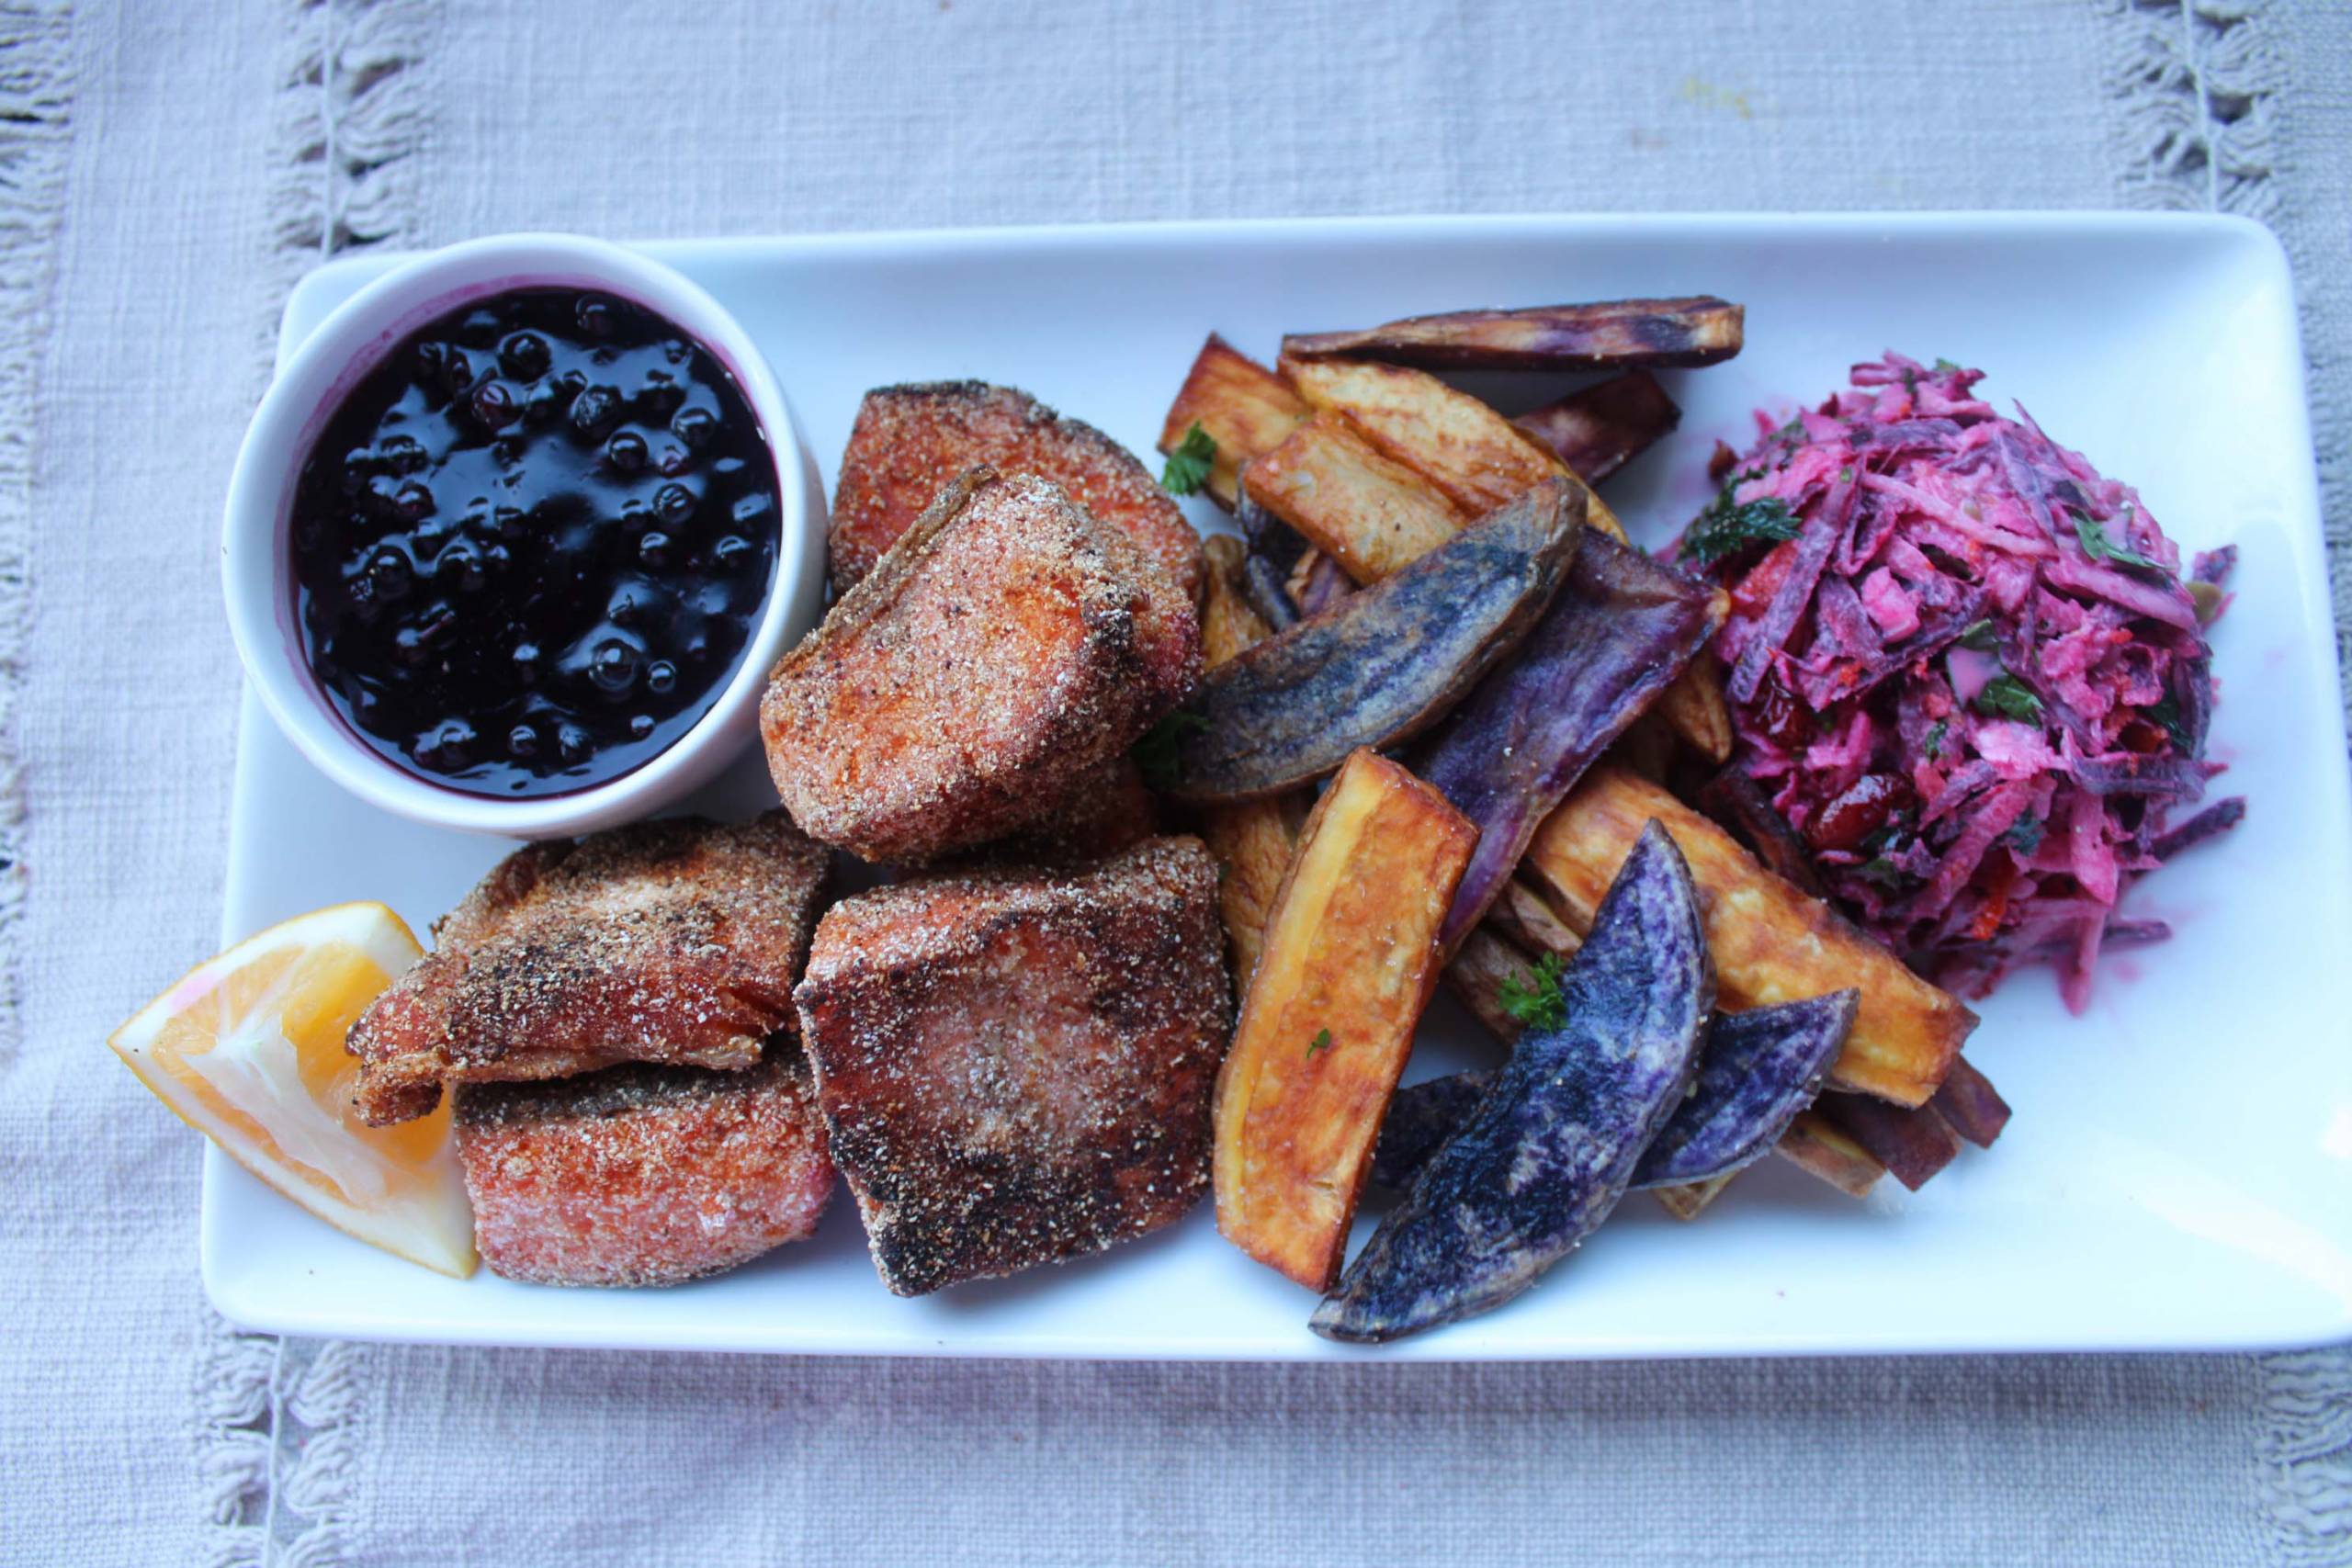 A plate of fried salmon and sweet potato fries, with berry sauce for dipping.